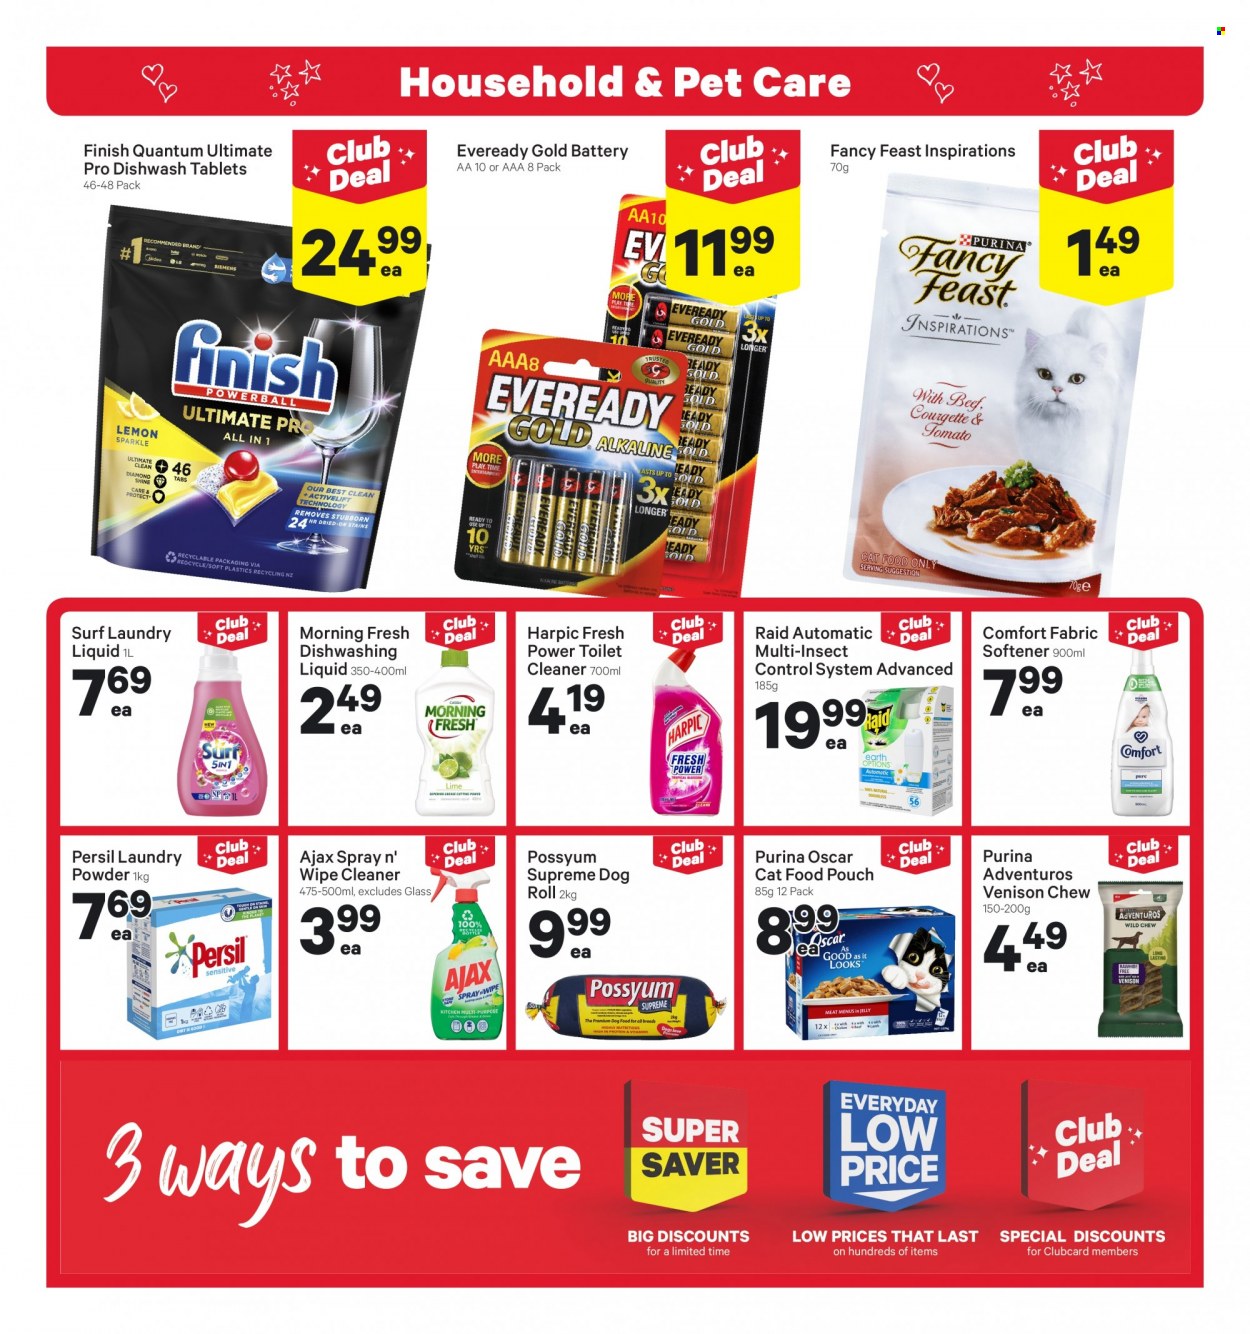 thumbnail - New World mailer - 30.01.2023 - 05.02.2023 - Sales products - cleaner, toilet cleaner, Harpic, Ajax, Persil, fabric softener, laundry detergent, laundry powder, Surf, Comfort softener, dishwashing liquid, Finish Powerball, Finish Quantum Ultimate, Raid, battery, Eveready, animal food, cat food, dog food, Purina, Fancy Feast. Page 16.